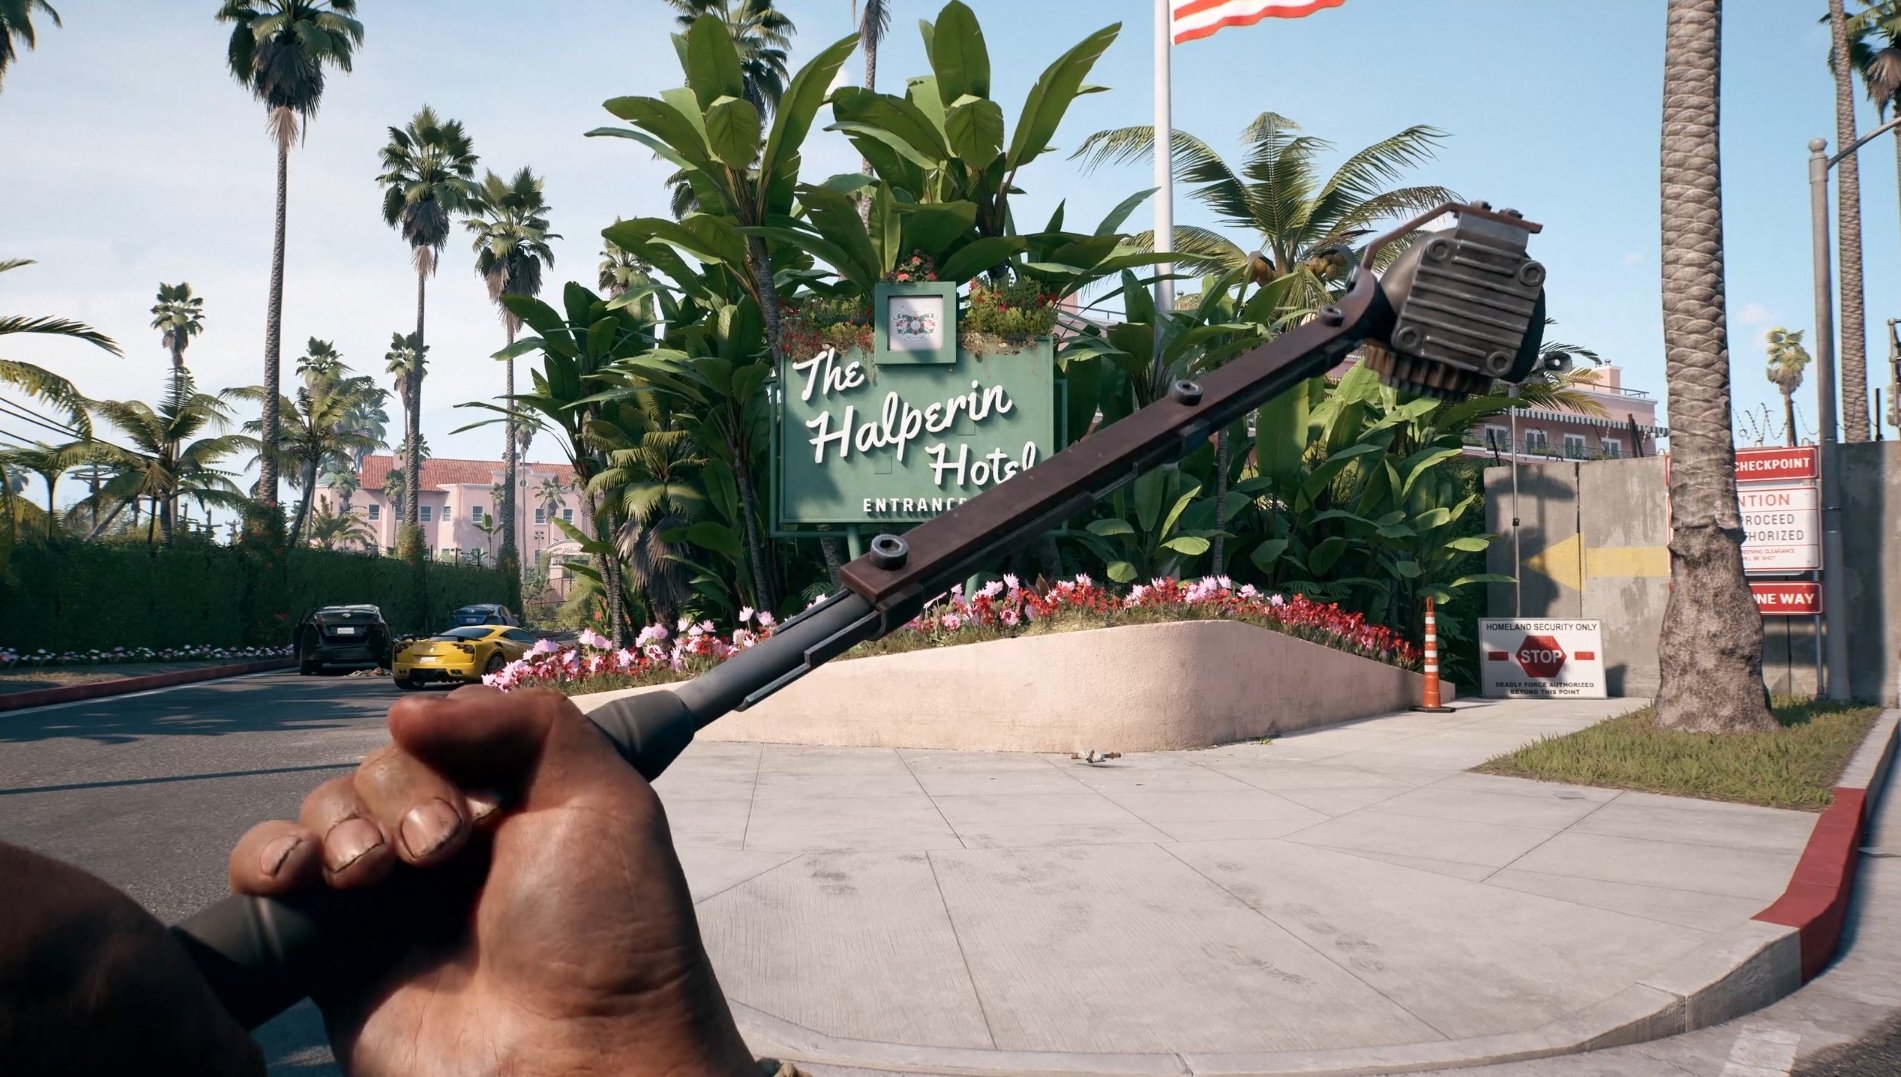 New Dead Island 2 DLC Details — What to Expect / Story Info 